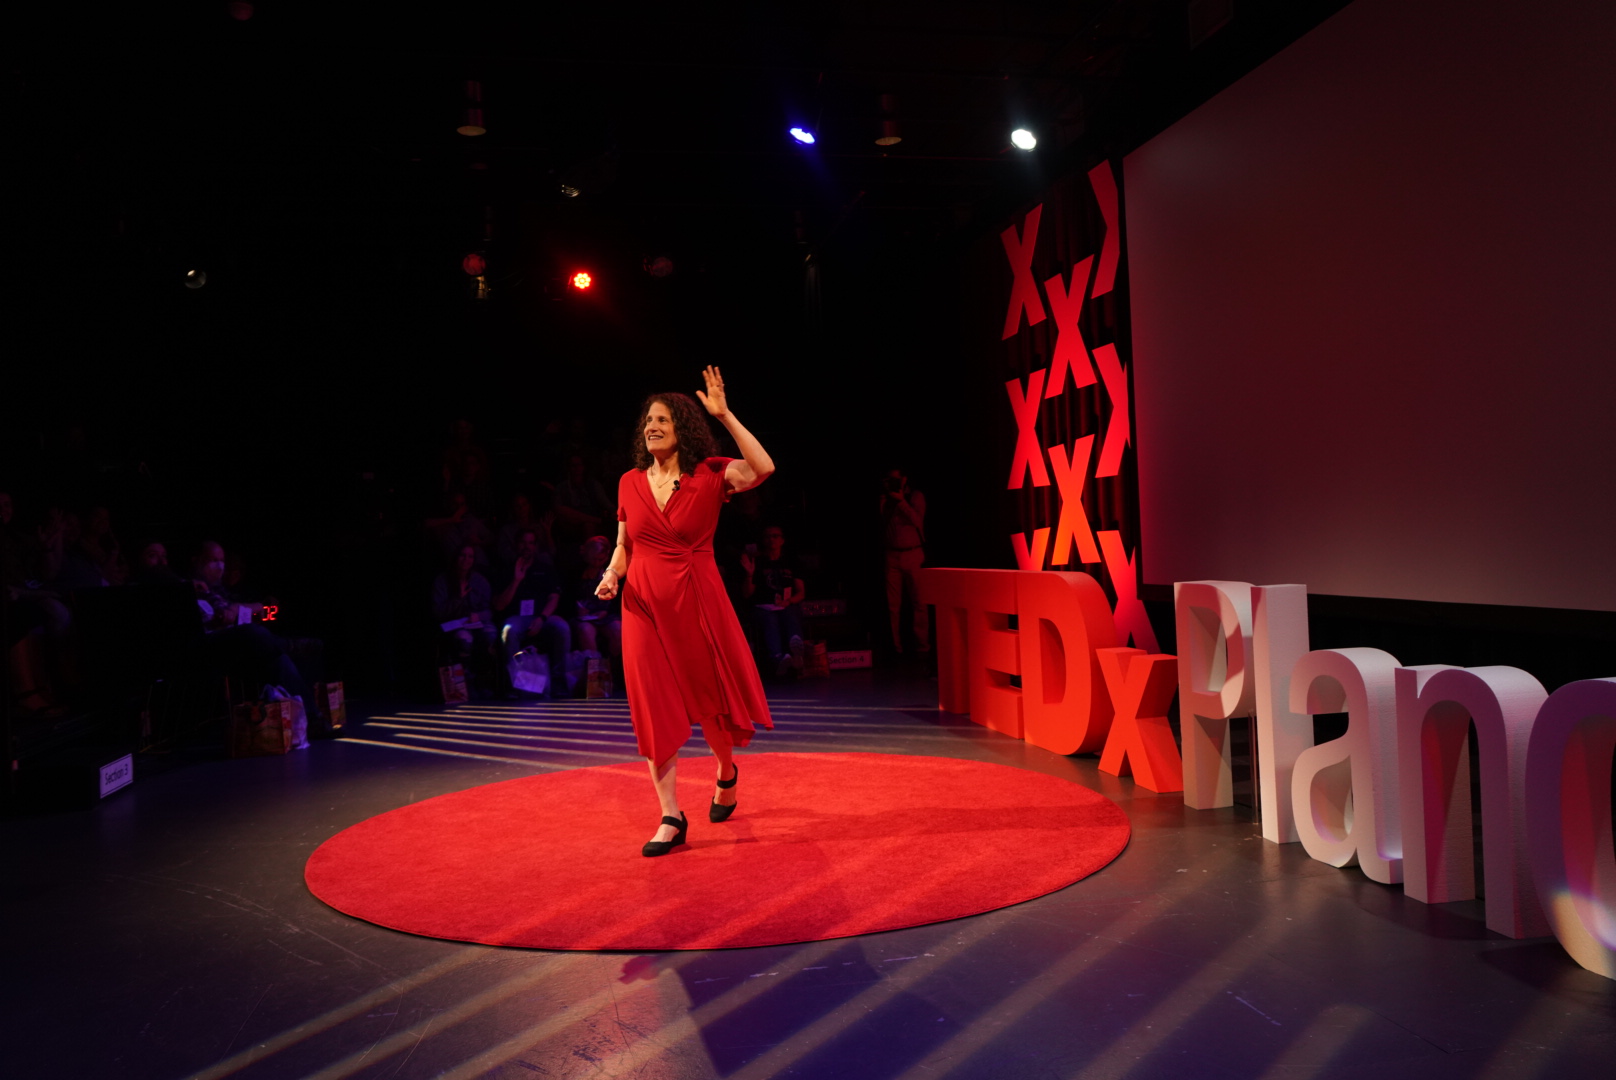 Meryl Evans waves to a full audience as she walks onstage to give a TED talk. She is wearing a bright red dress that matches the red carpet on the stage.